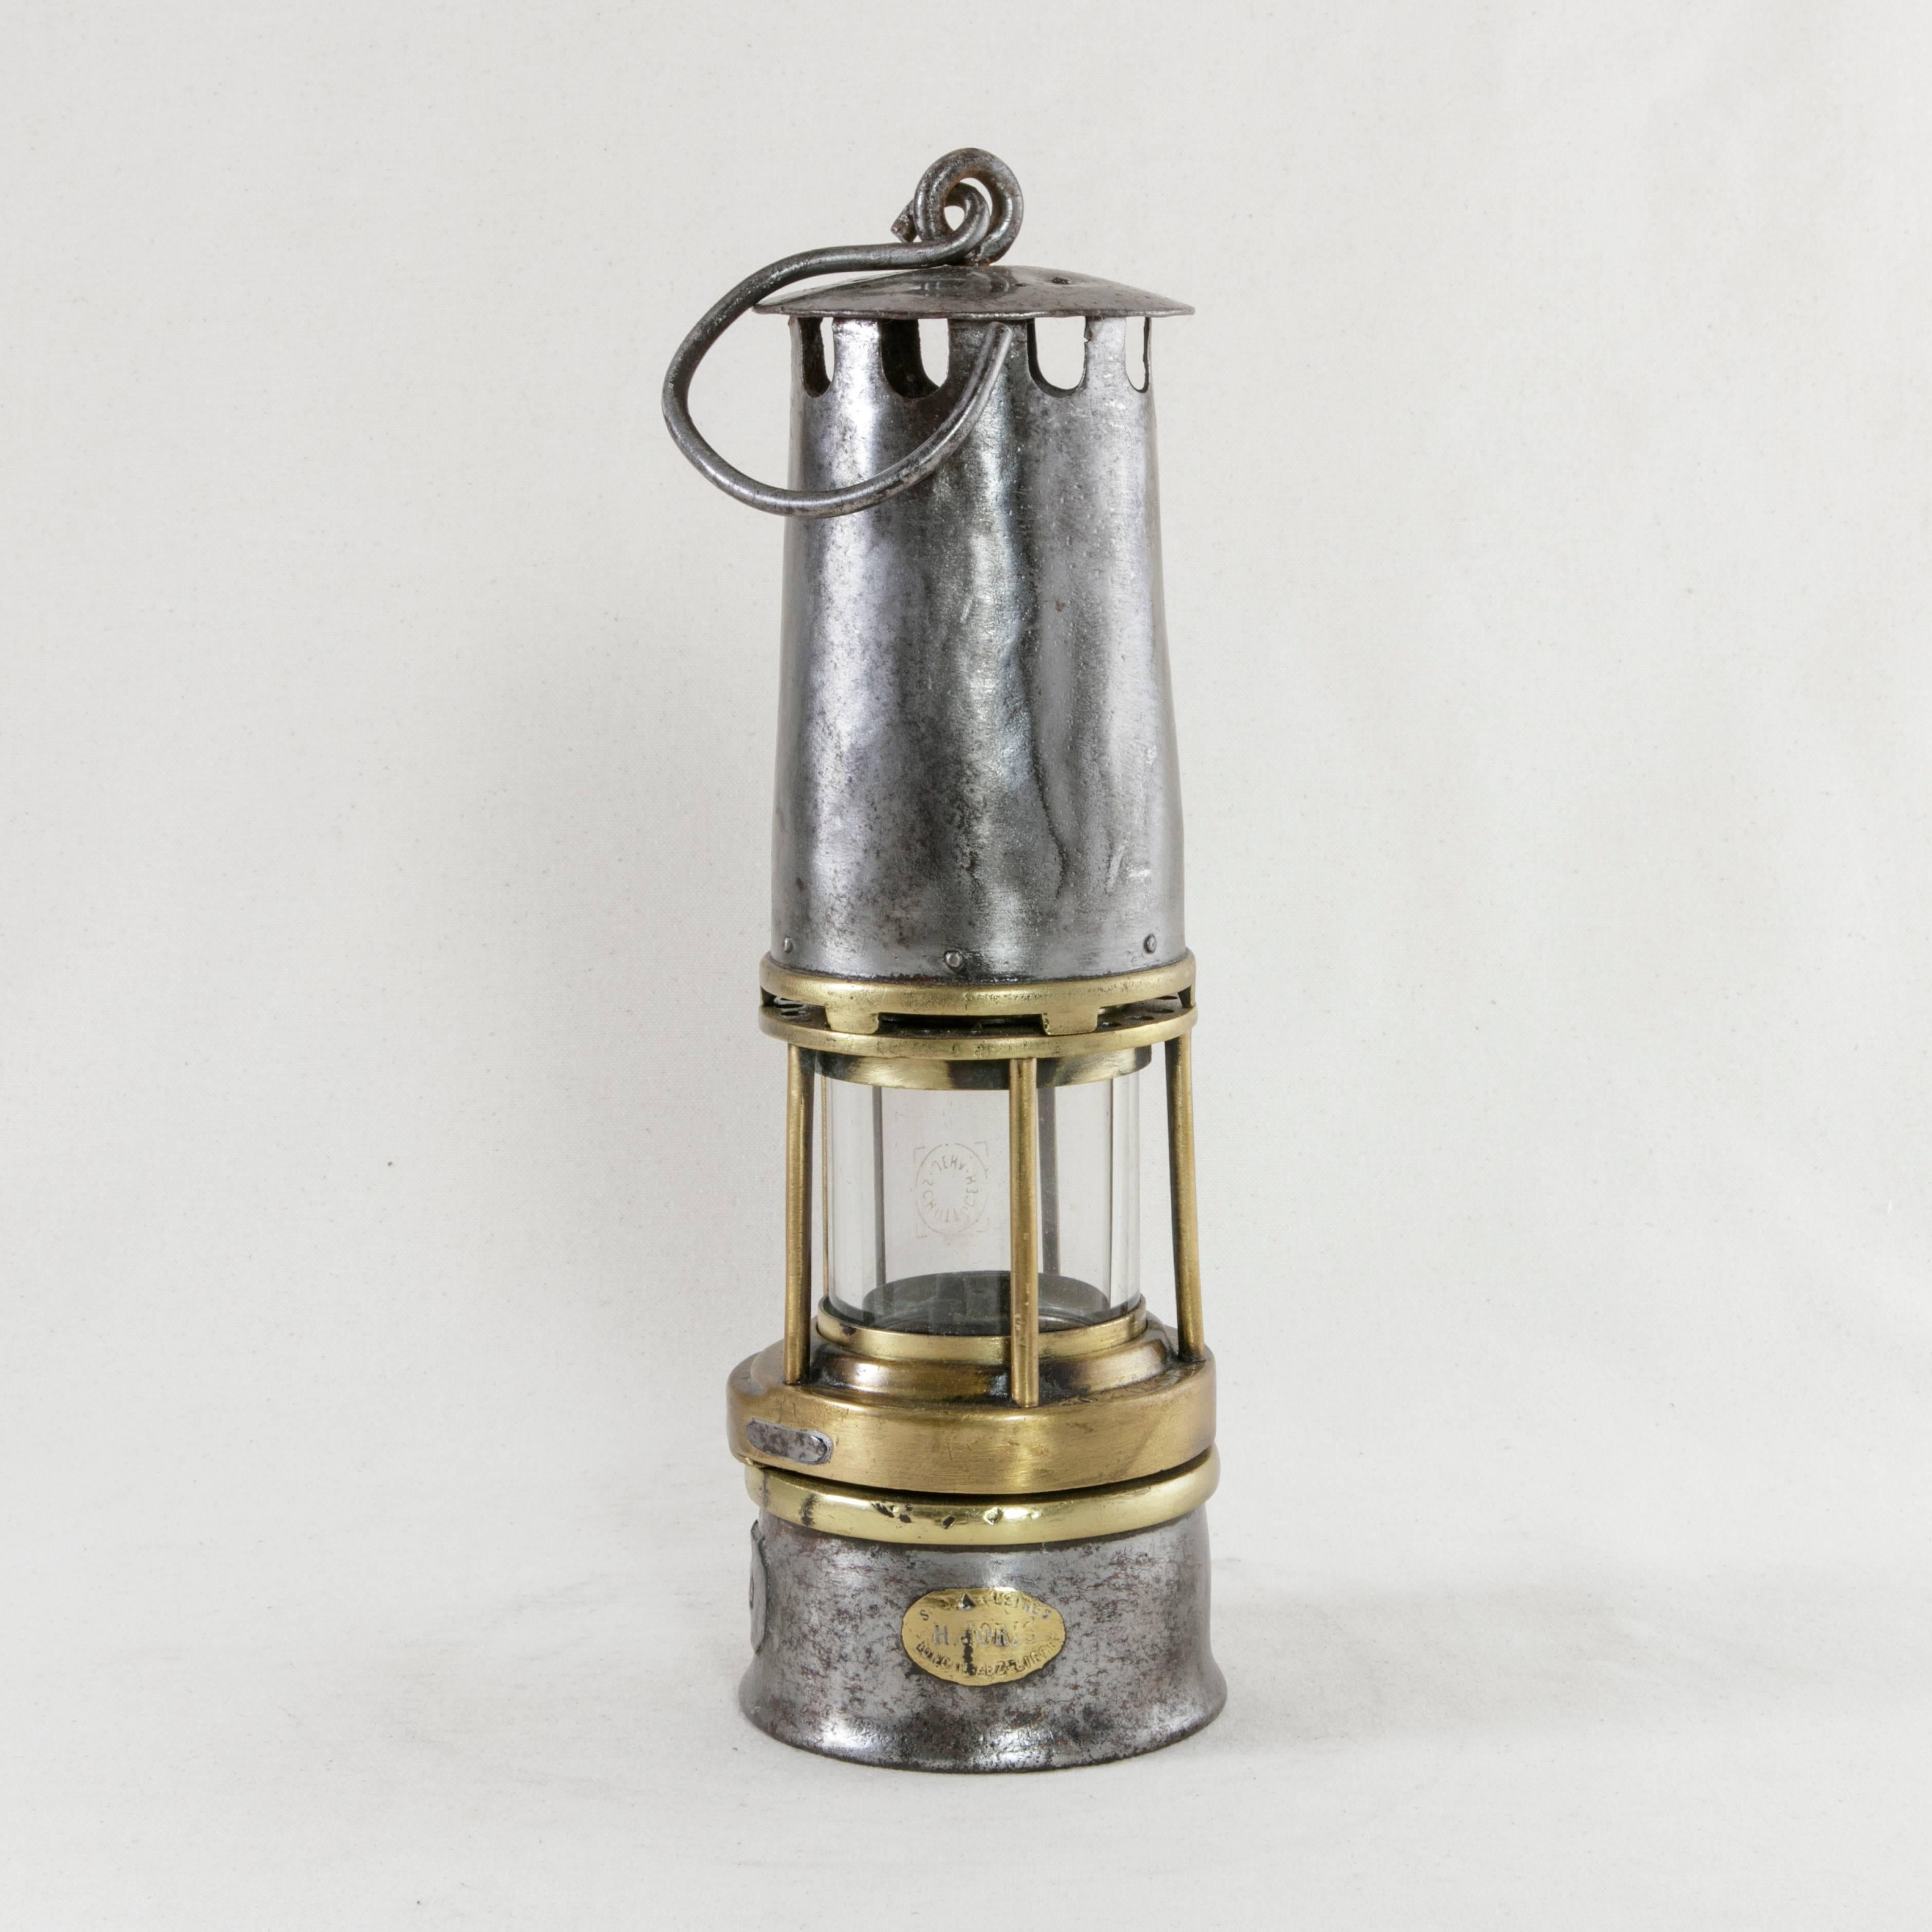 This Belgian steel miner's lantern, circa 1900 features brass trim around its original glass casing. A brass plaque labeled H. Joris, S.N.A. Usines, Liege, indicates its fabrication by the Joris Company at their factory in Liege, Belgium. Additional